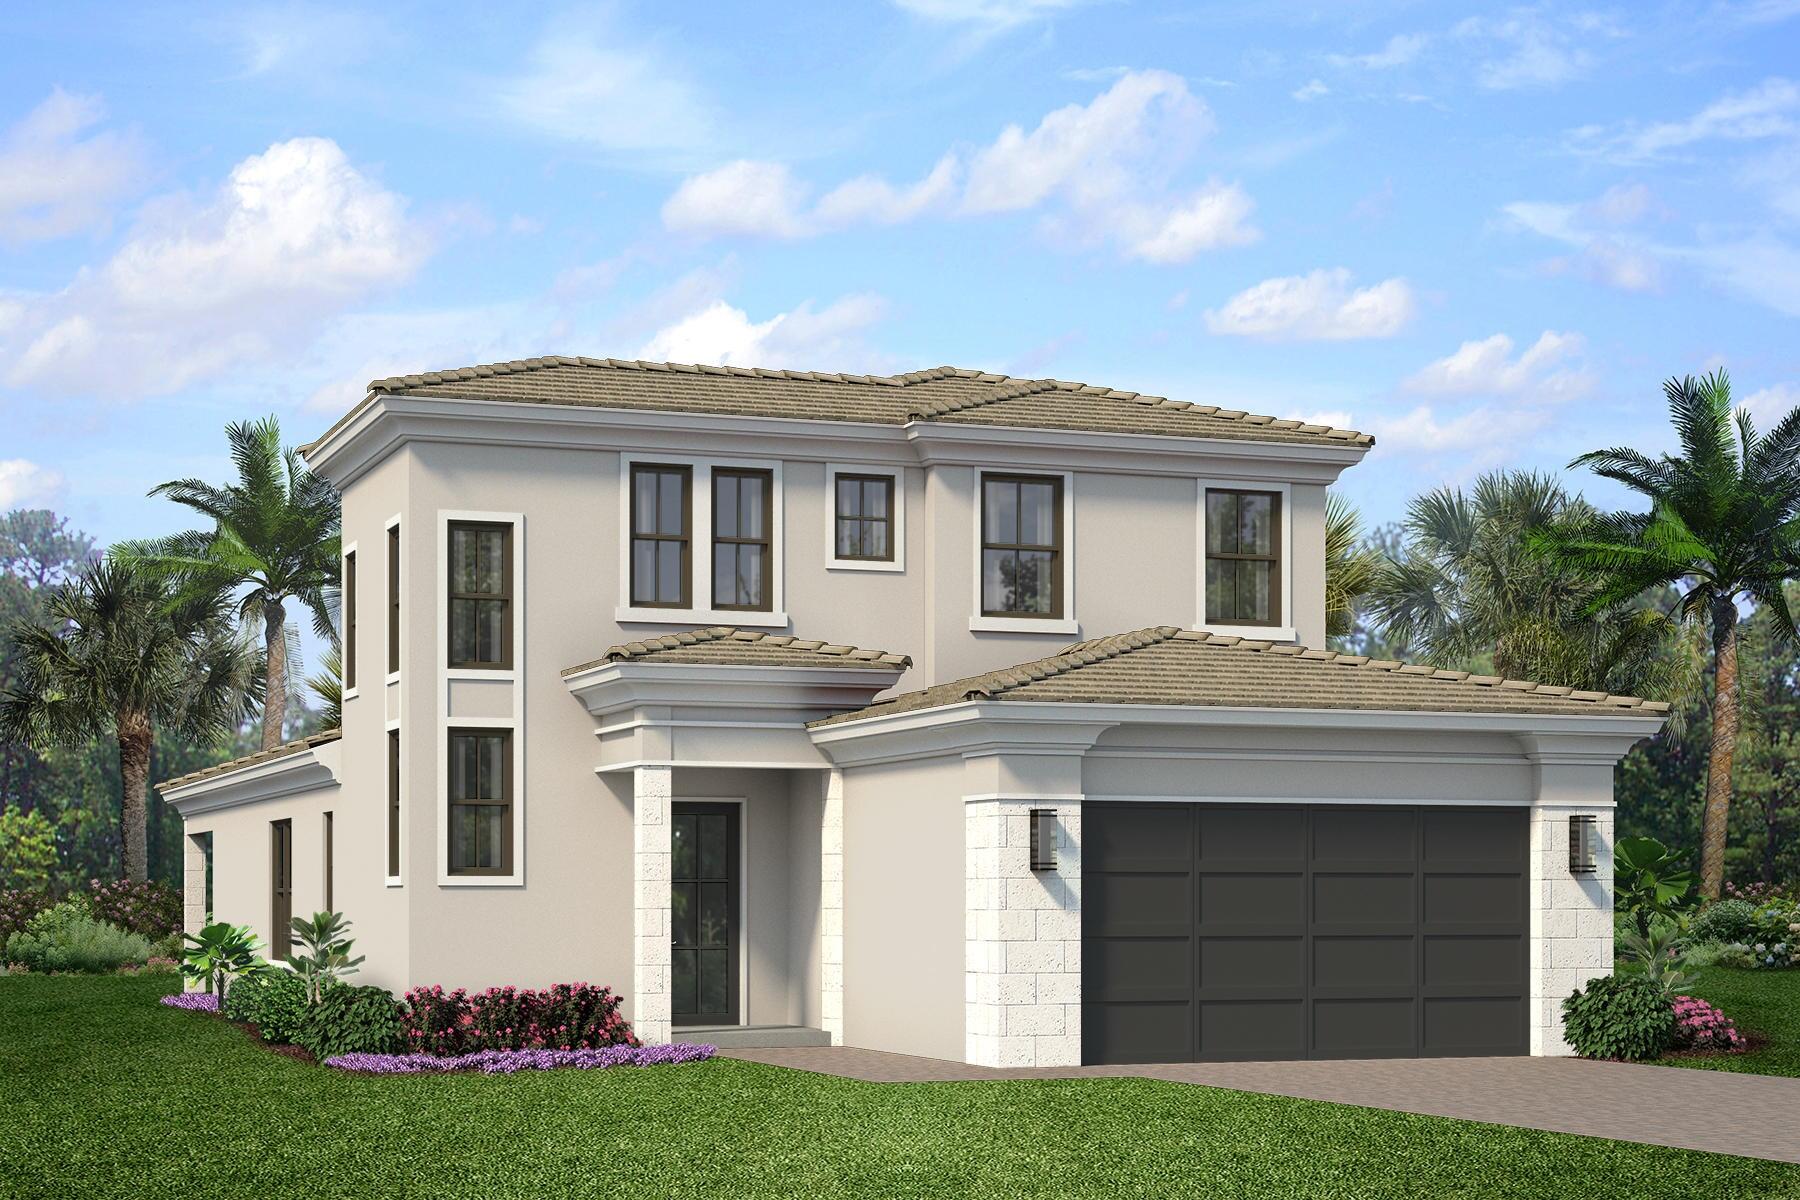 ** UNDER CONSTRUCTION** stunning two-story home features 3 Bedroom, Den, Loft, 3 Full and 1 Half Bath, and a 2-Car Garage. The Island Kitchen is designed with White cabinets with crown moulding, Quartz countertops and backsplash, a 36'' cooktop monogram, and 36'' built-in Oven. The open floor plan is perfect for gathering and socializing while entertaining. The expansive sliding doors that open onto the lanai fill the Great Room with natural light. The Owner's Suite has tray ceilings and large windows, and the Owner's Bath offers a double vanity, a frameless walk-in shower with a bench seat, and a walk-in closet. The second floor boasts two additional Suites and a spacious Loft. The lanai includes plumbing, gas, and electric for a future summer kitchen.